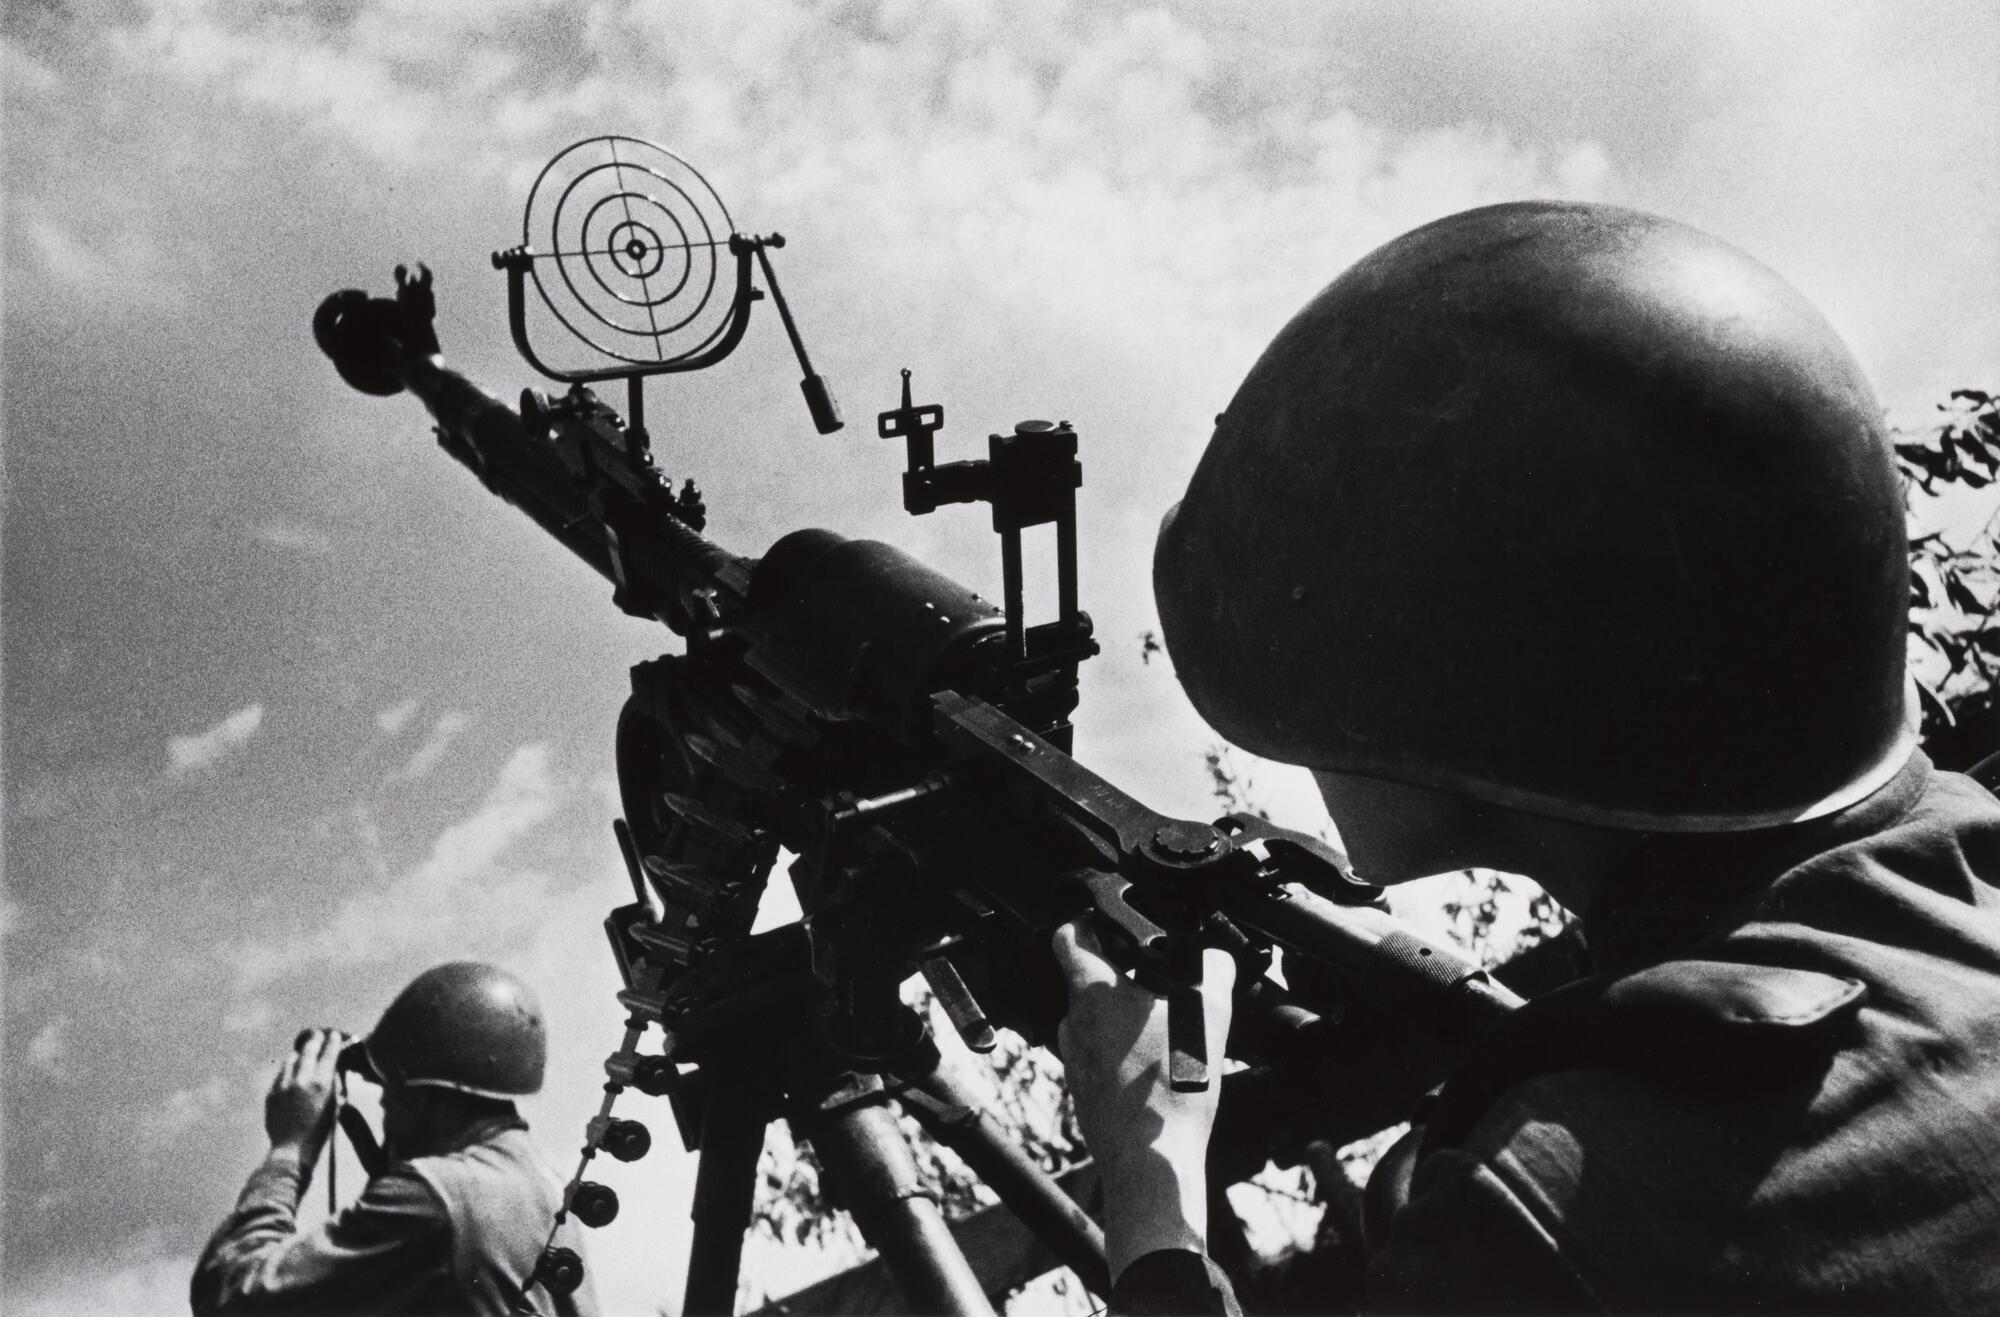 View down the barrel of an anti-aircraft gun seen from behind the shoulder of a young soldier; another soldier with binoculars is visible in the lower left.